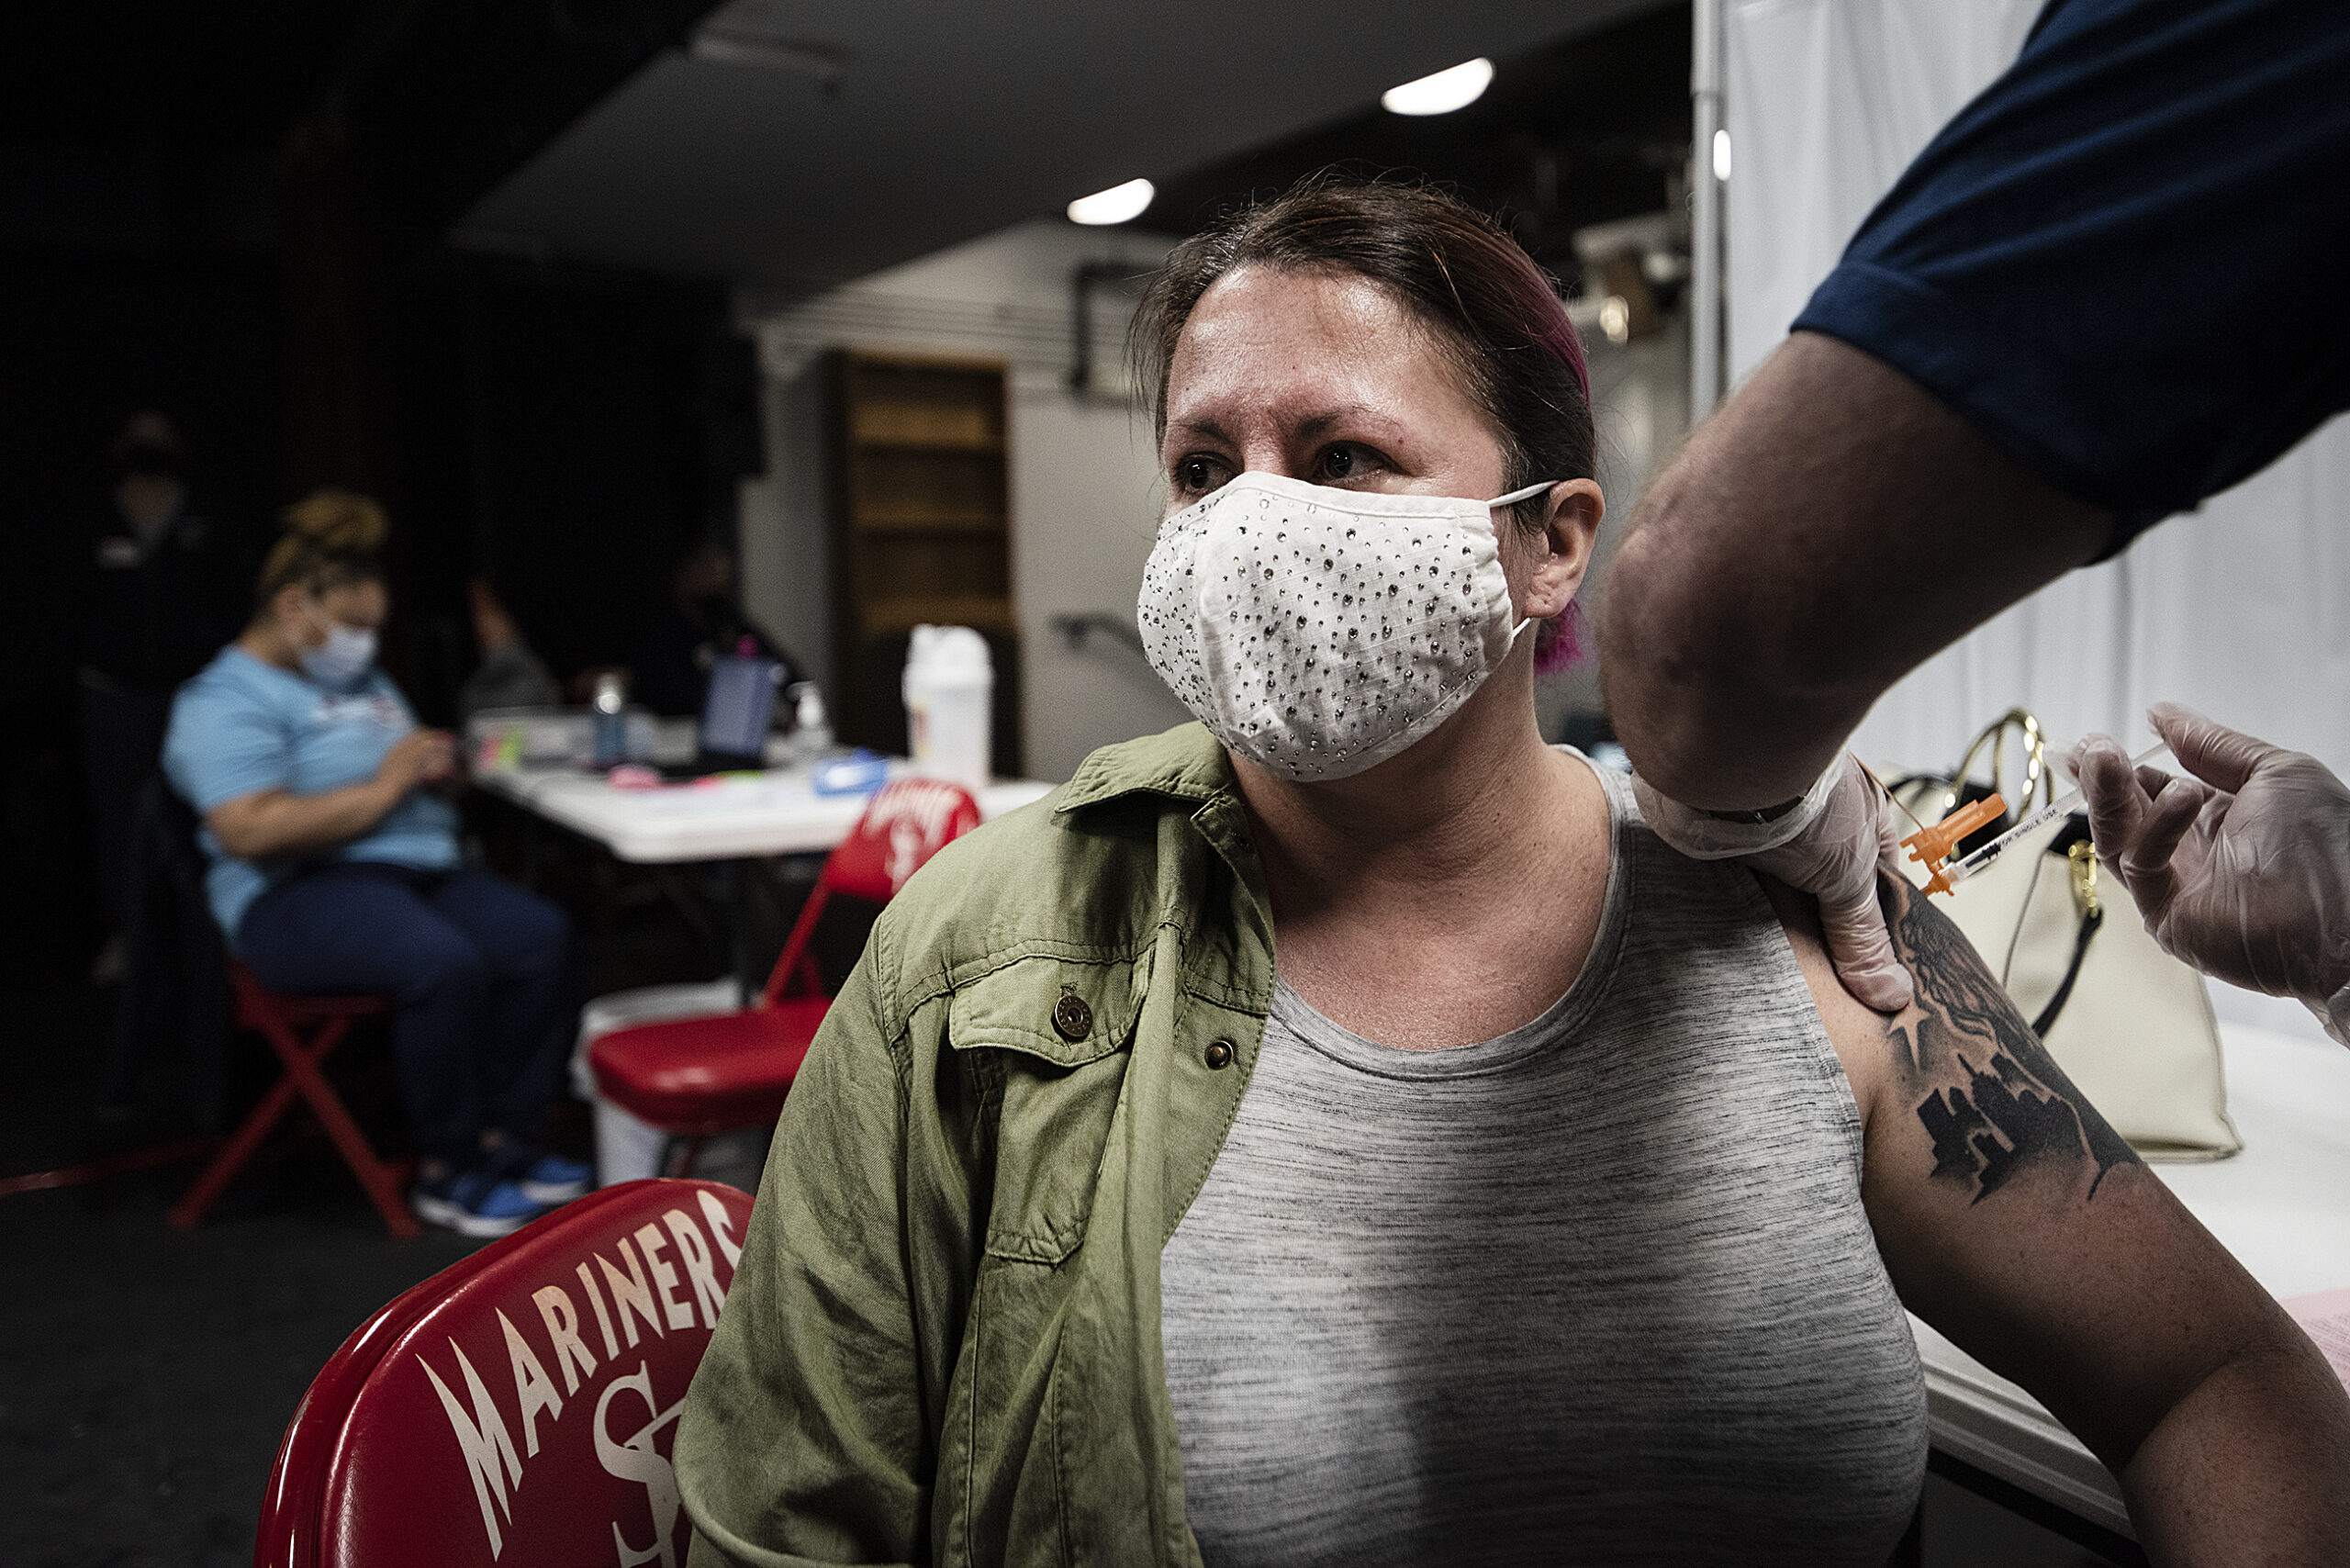 A woman wears a face mask as she receives a COVID-19 vaccine.